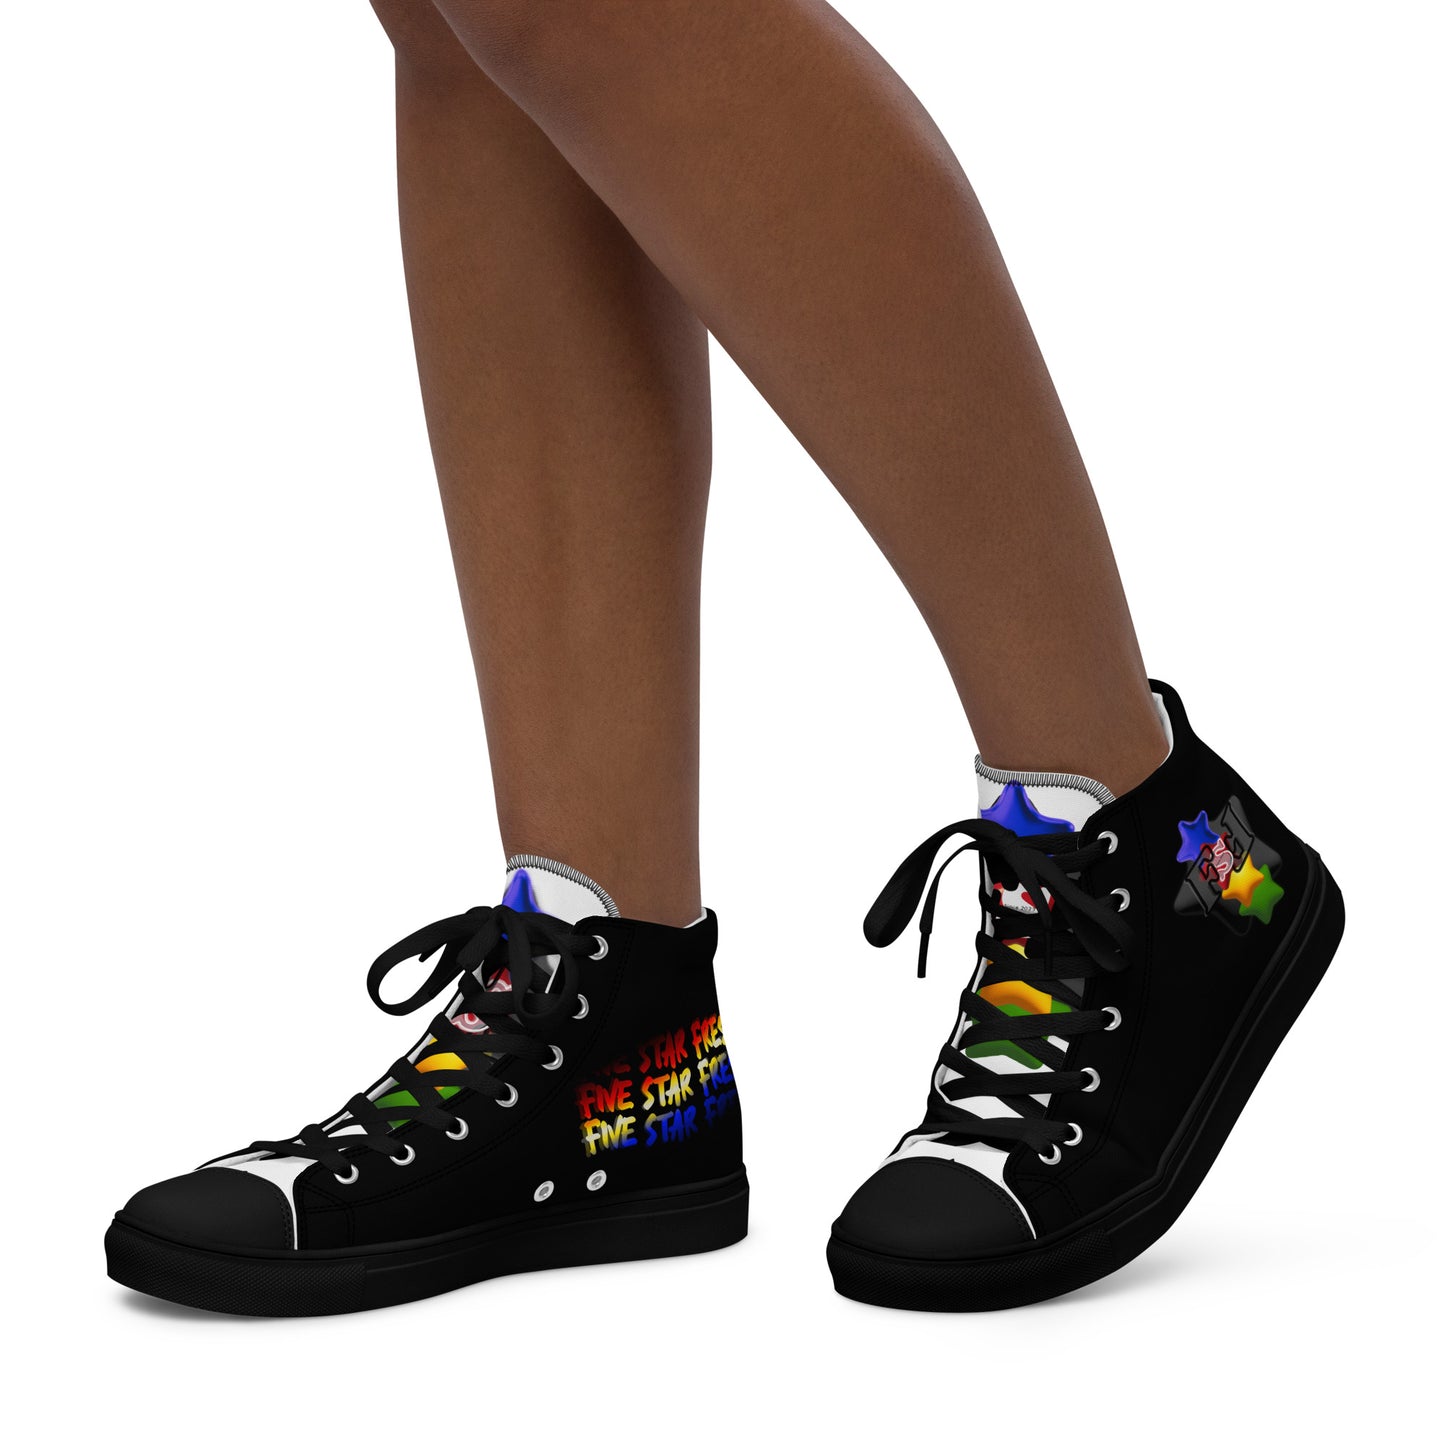 Women’s high top canvas shoes - FSF Stacked 'Black Star' Black